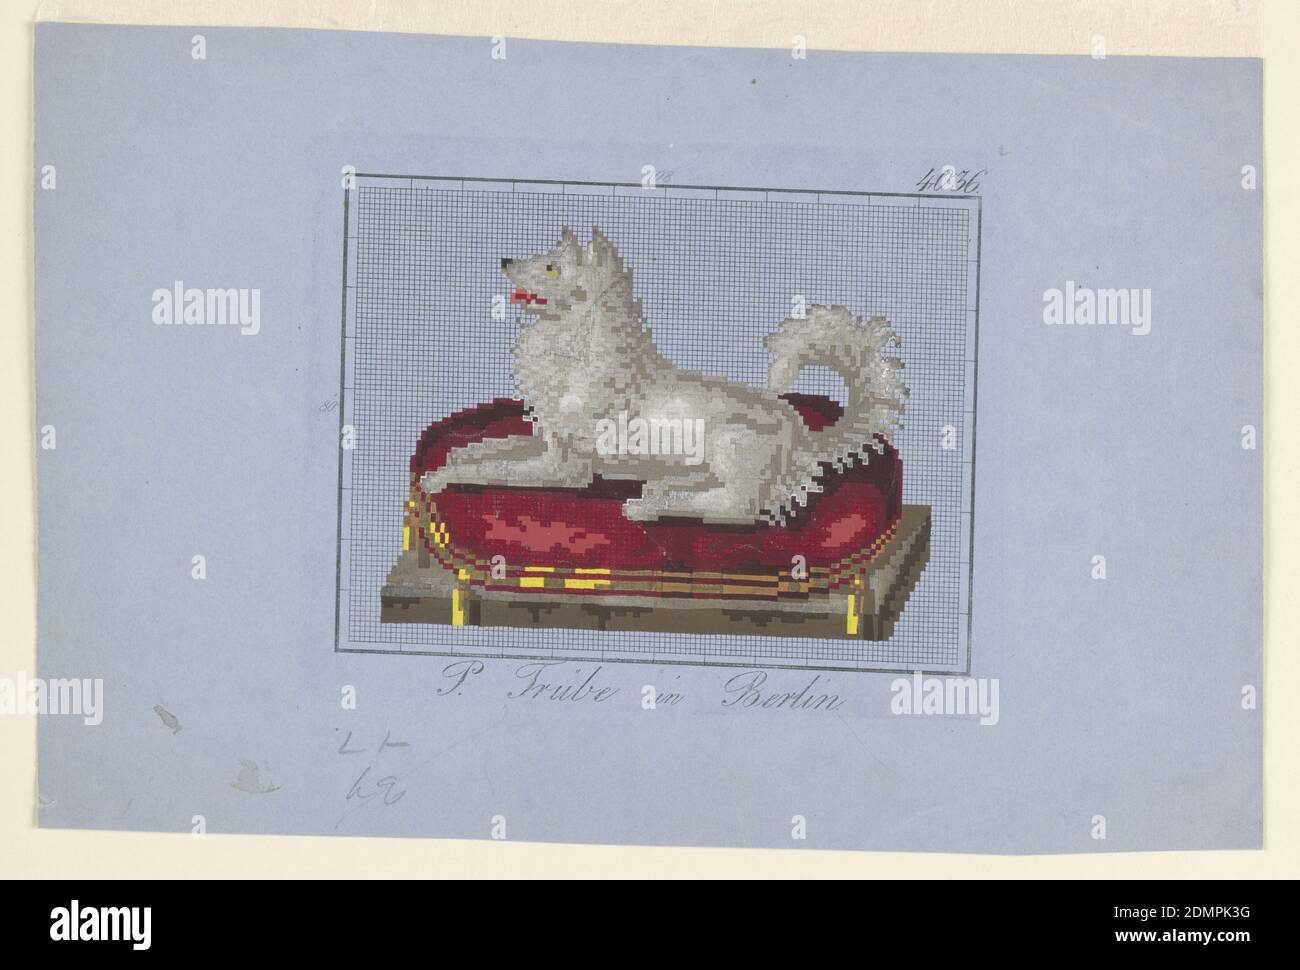 Design for Berlin Wool Work, Spitz, P. Trübe, Berlin, Germany, Brush and gouache over etching on blue-gray wove paper, Embroidery design featuring a white Spitz-type dog, seen in left profile, lying on a red cushion, trimmed with yellow tassels., Berlin, Germany, ca. 1850, textile designs, Drawing Stock Photo